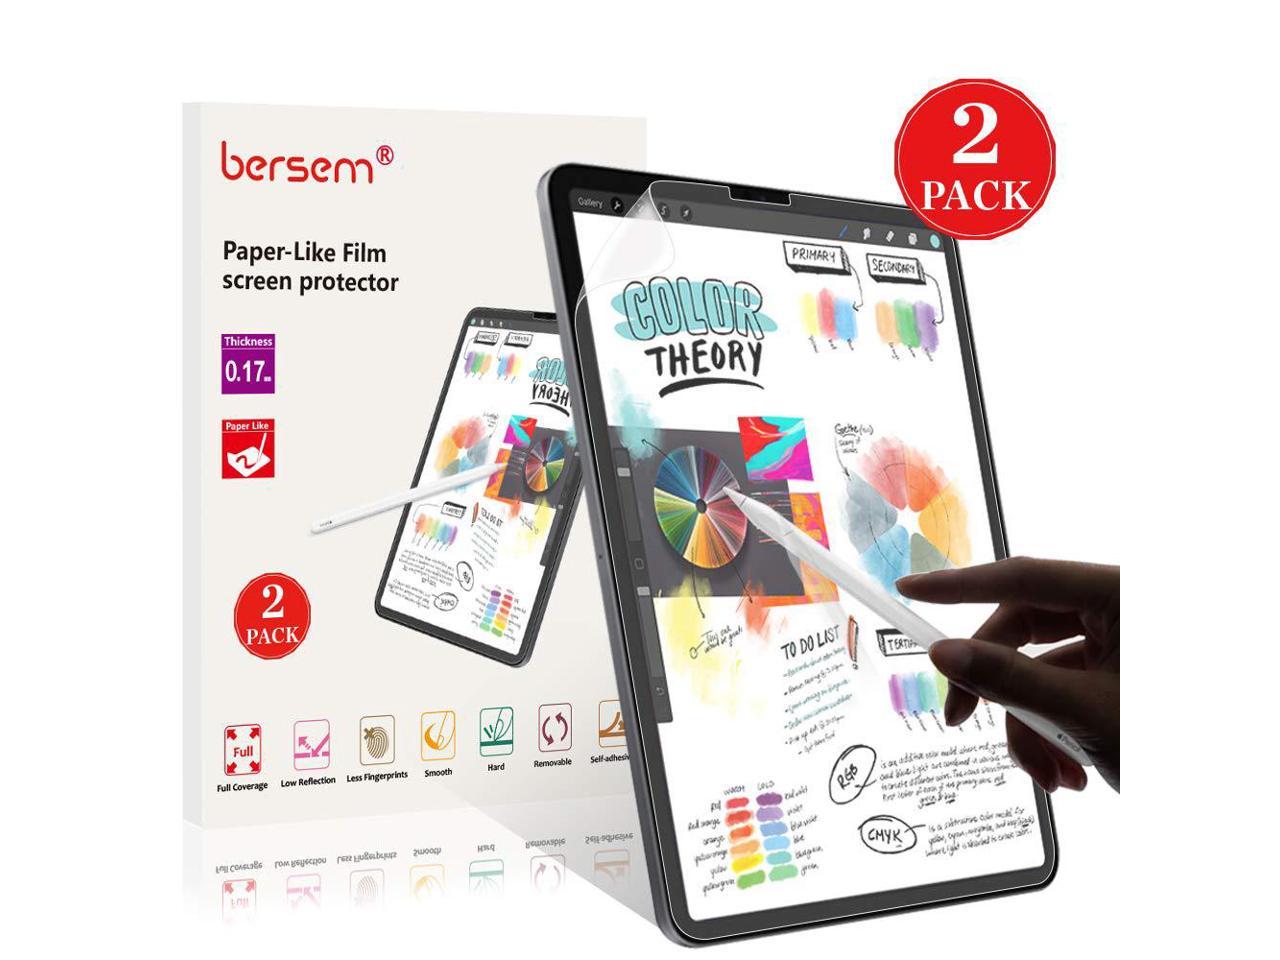 Bersem Paperlike Ipad Pro 11 Screen Protector 2 Pack Write And Draw Like On Paper With Paper Texture For Ipad Pro 11 18 Anti Glare Matte Surface Easy Install Non Glass Newegg Com